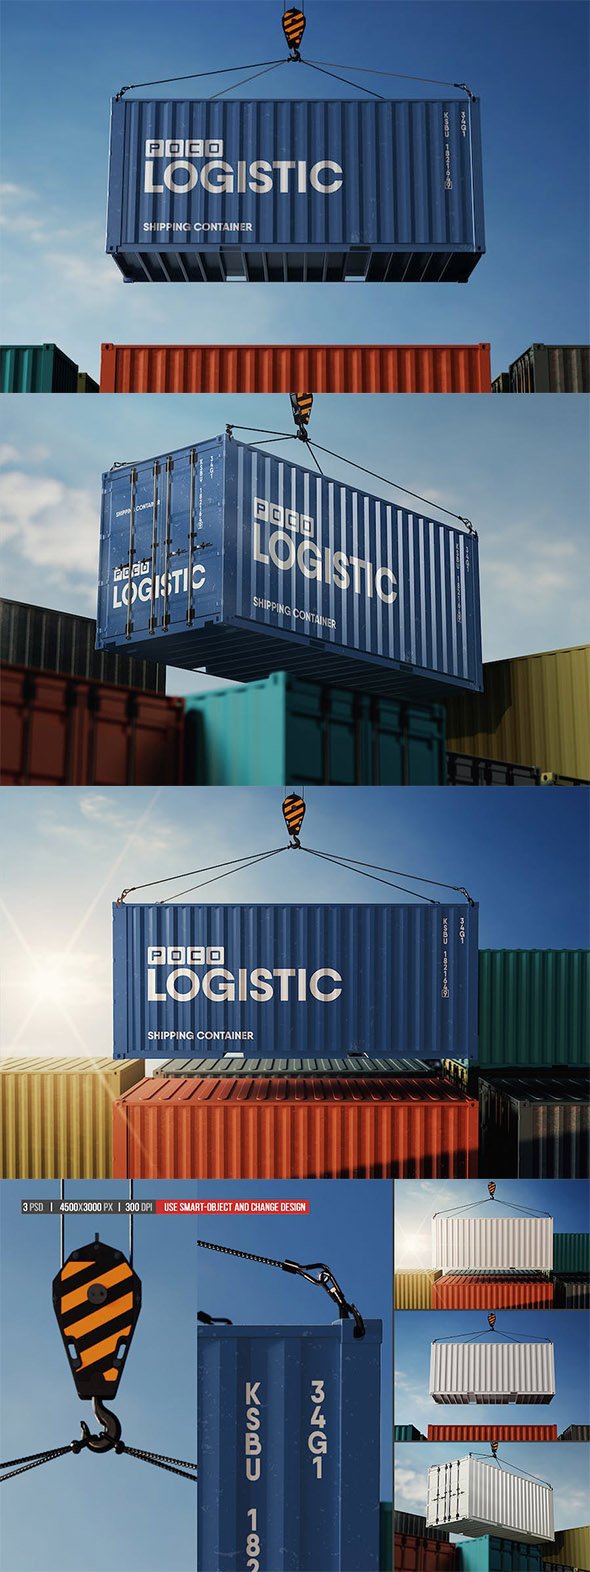 Shipping Container Hanging on Hook Mockup - HQQQ9P4